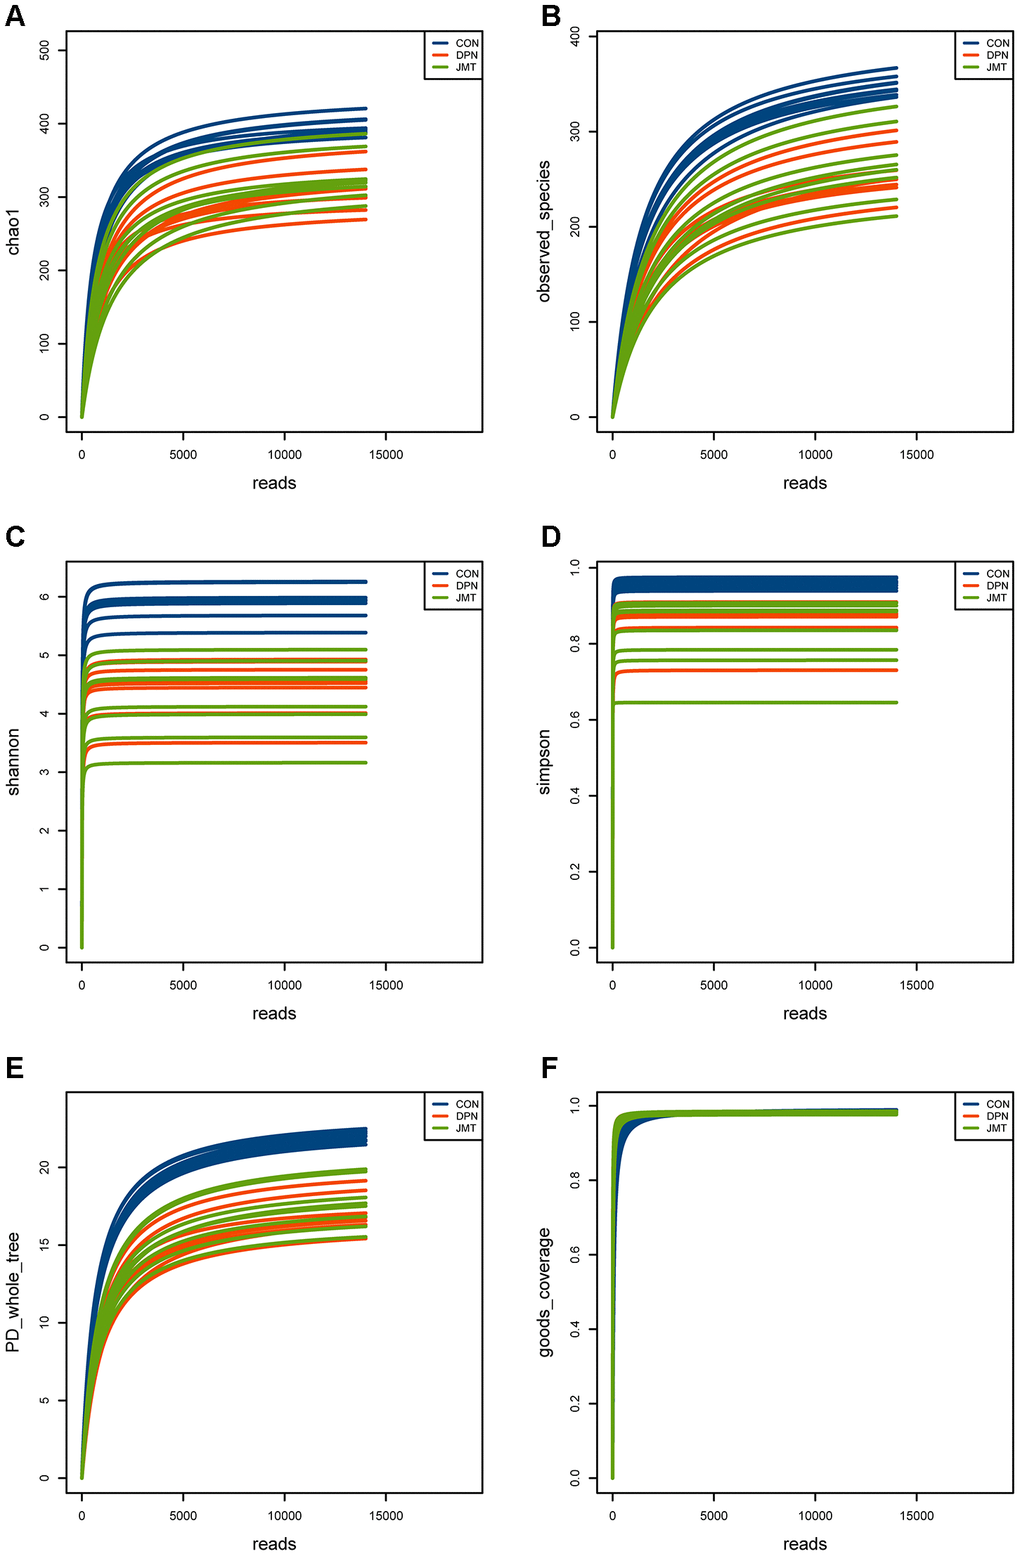 Rarefaction curves of the alpha diversity indexes in different groups. Rarefaction curves of (A) the Chao1 index, (B) observed species index, (C) Shannon index, (D) Simpson index, (E) PD whole tree index, (F) goods coverage index of fecal samples from different groups. All of the alpha diversity indexes achieved stability in different groups, which means the sequencing sample size for gut microbiota analysis is sufficient and the sequencing depth is enough.